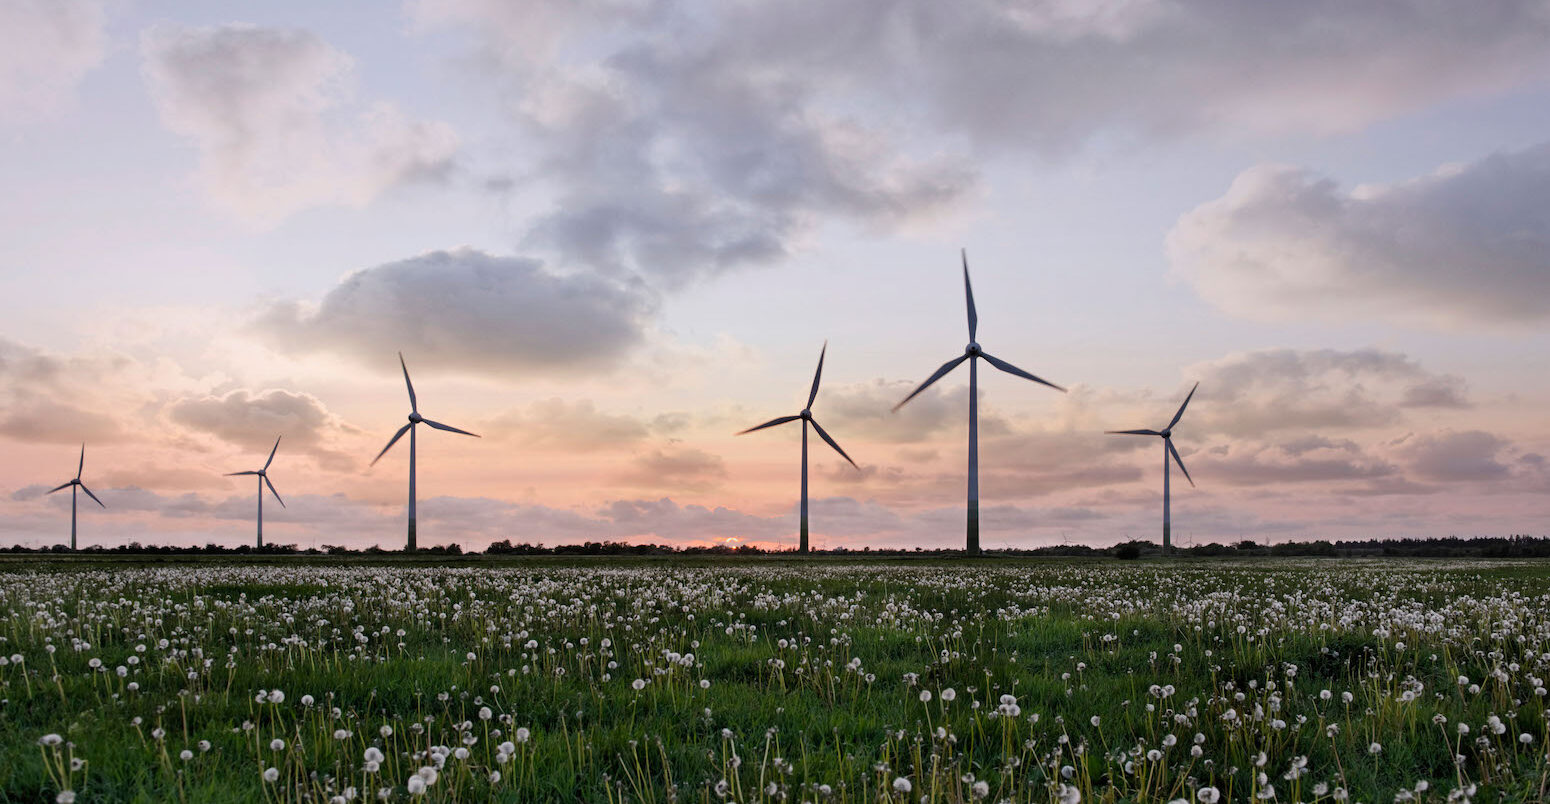 Silhouette of wind turbines in sunset.